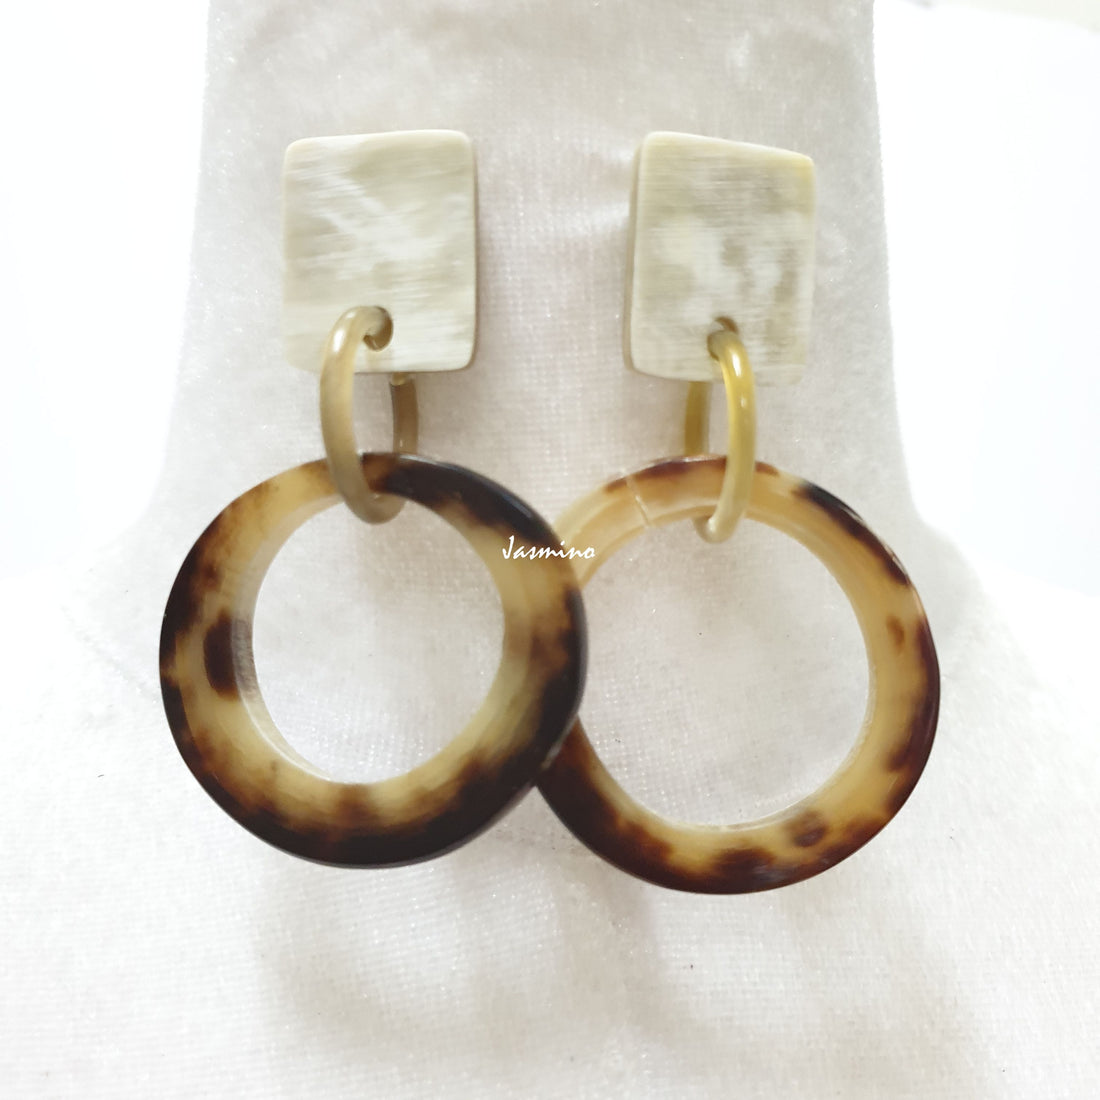 Handmade circular earrings feature leopard skin with brown and yellow in the natural light